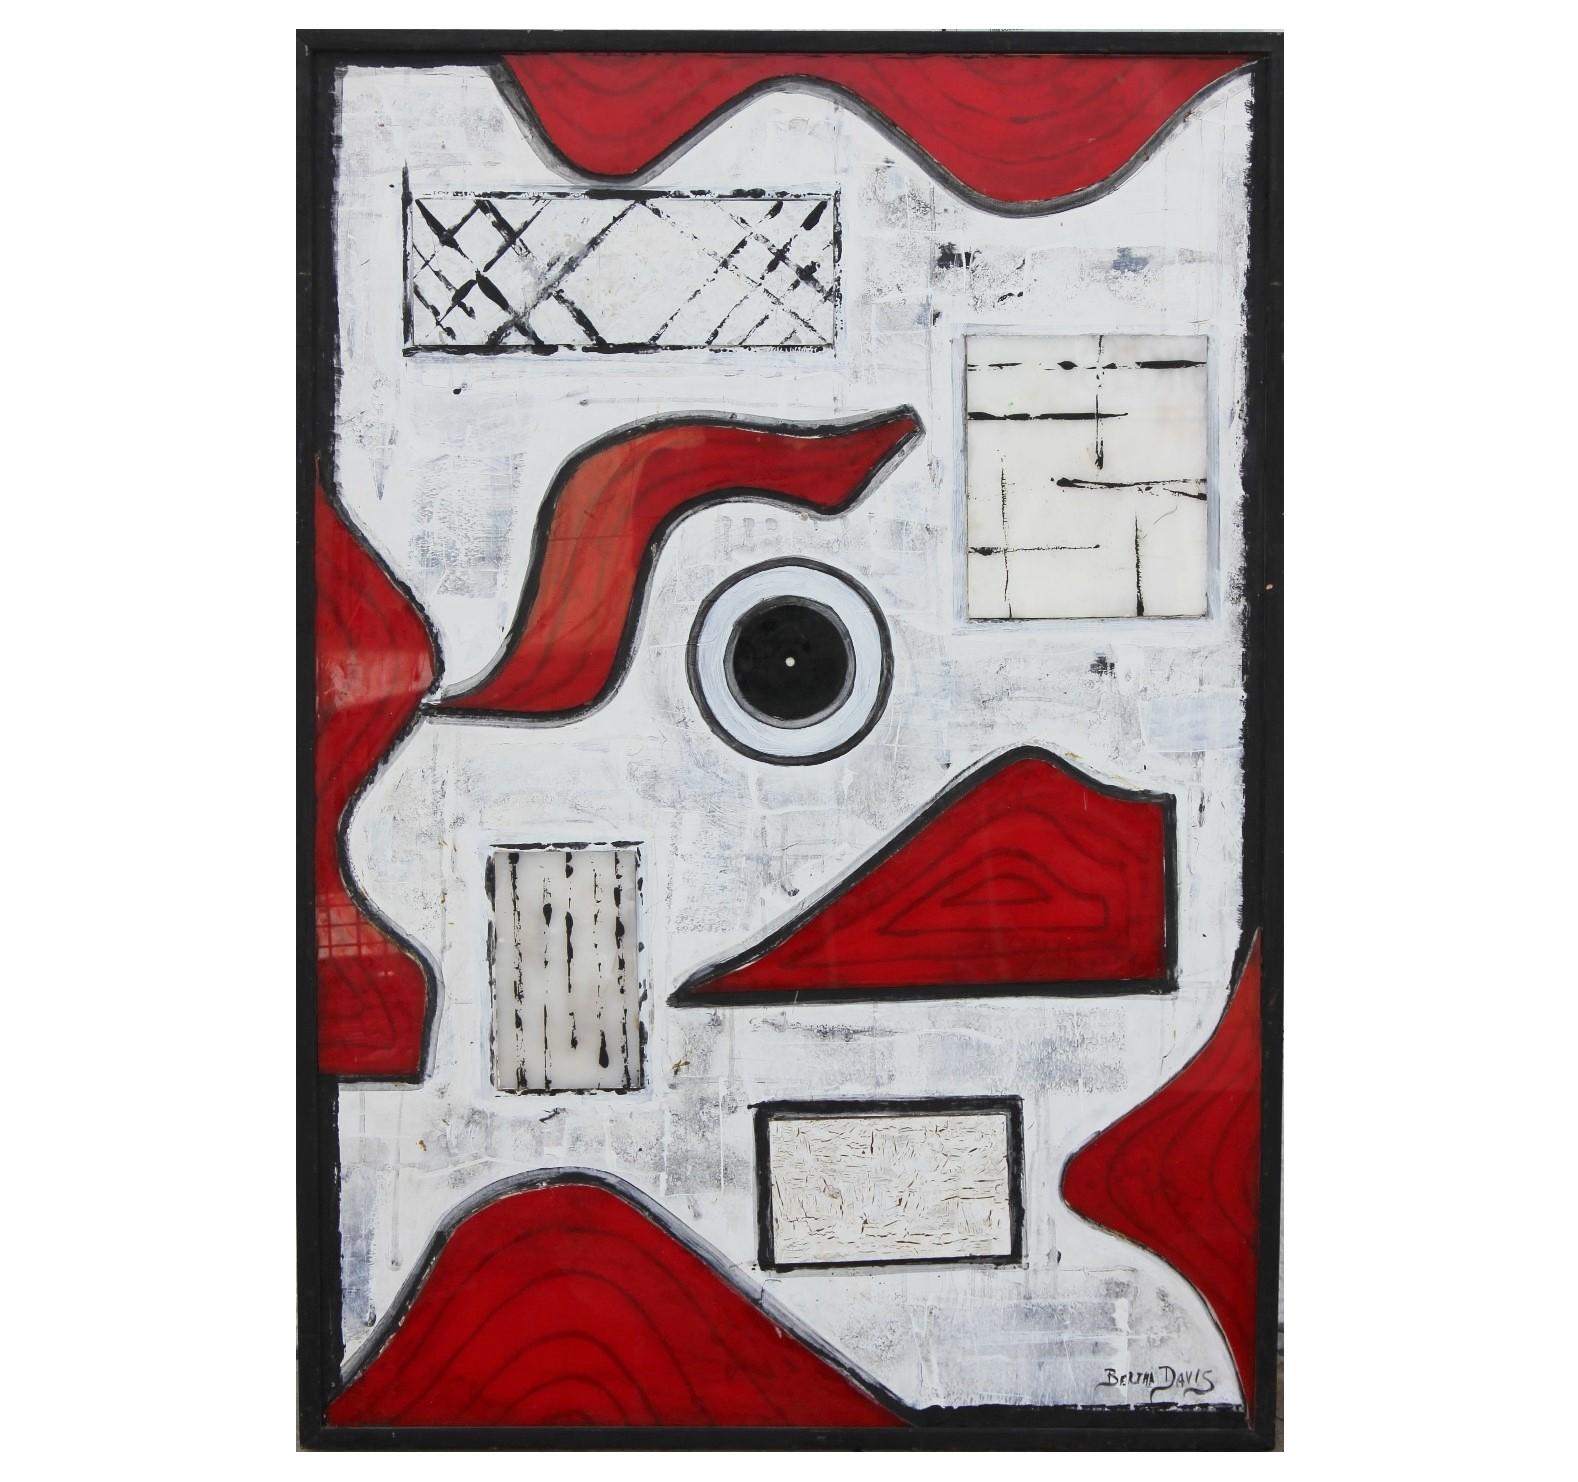 Bertha Davis Abstract Painting - Organic and Geometric Assemblage Painting with Red